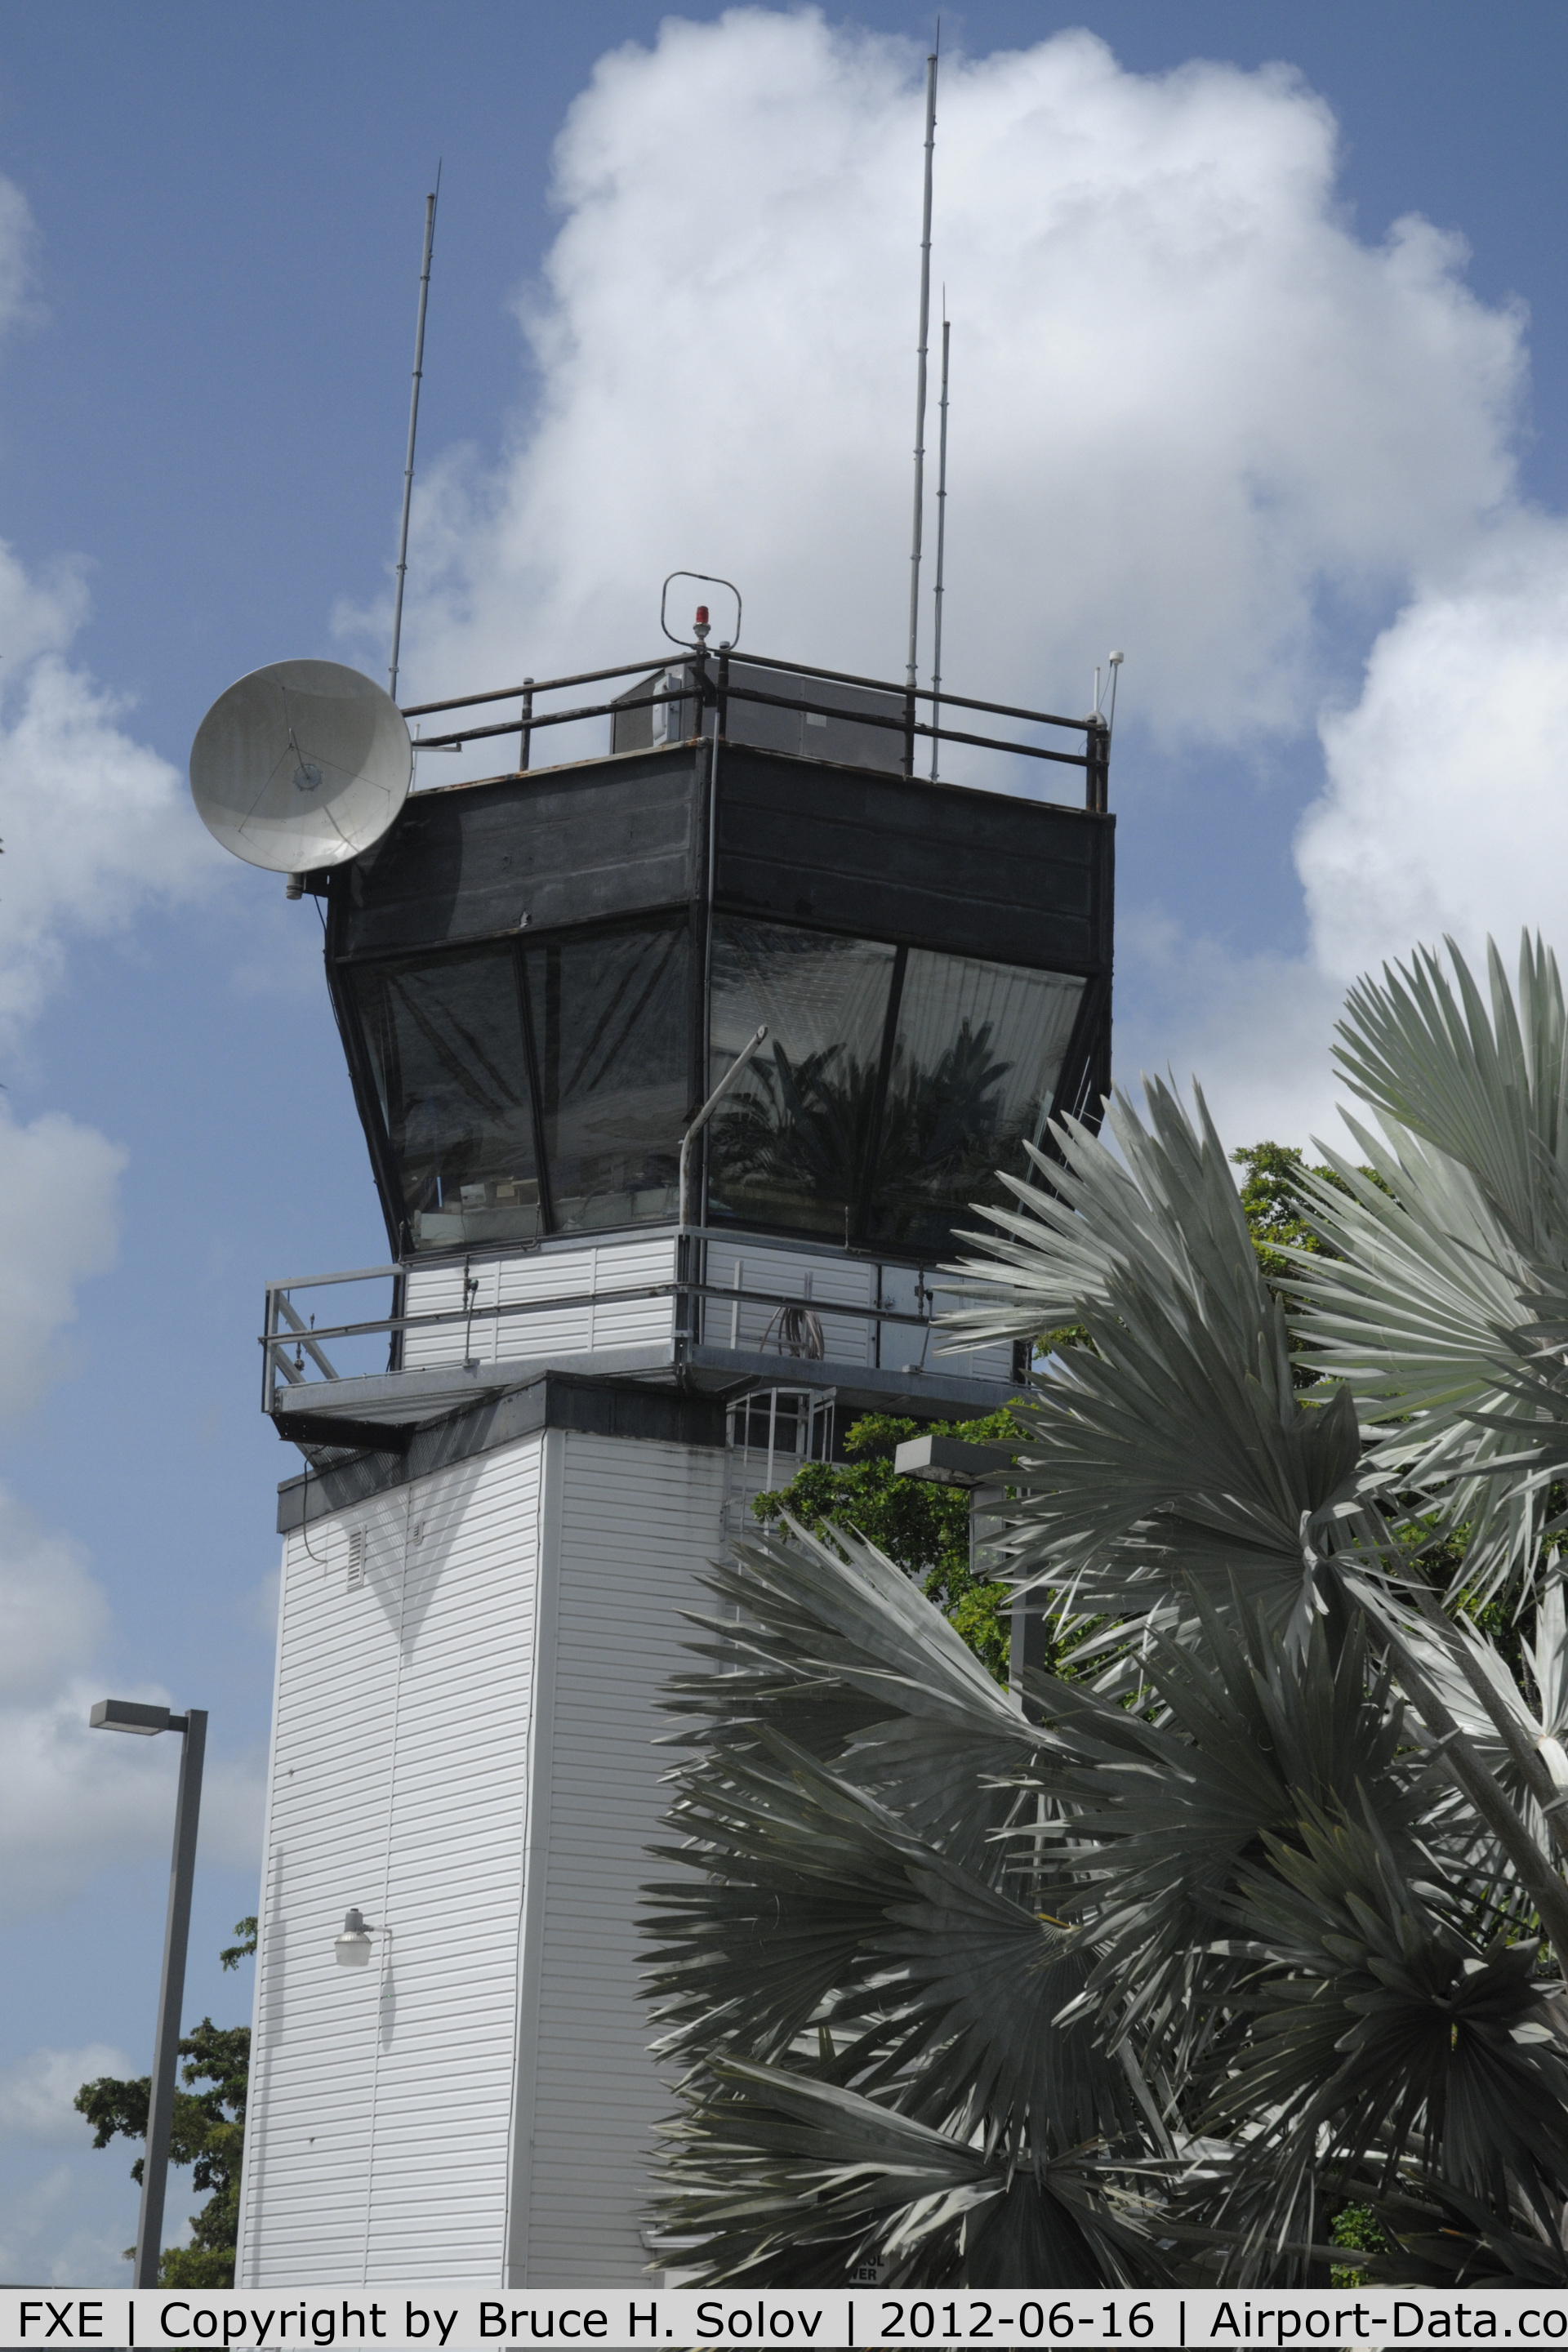 Fort Lauderdale Executive Airport (FXE) - The ATC tower at FXE